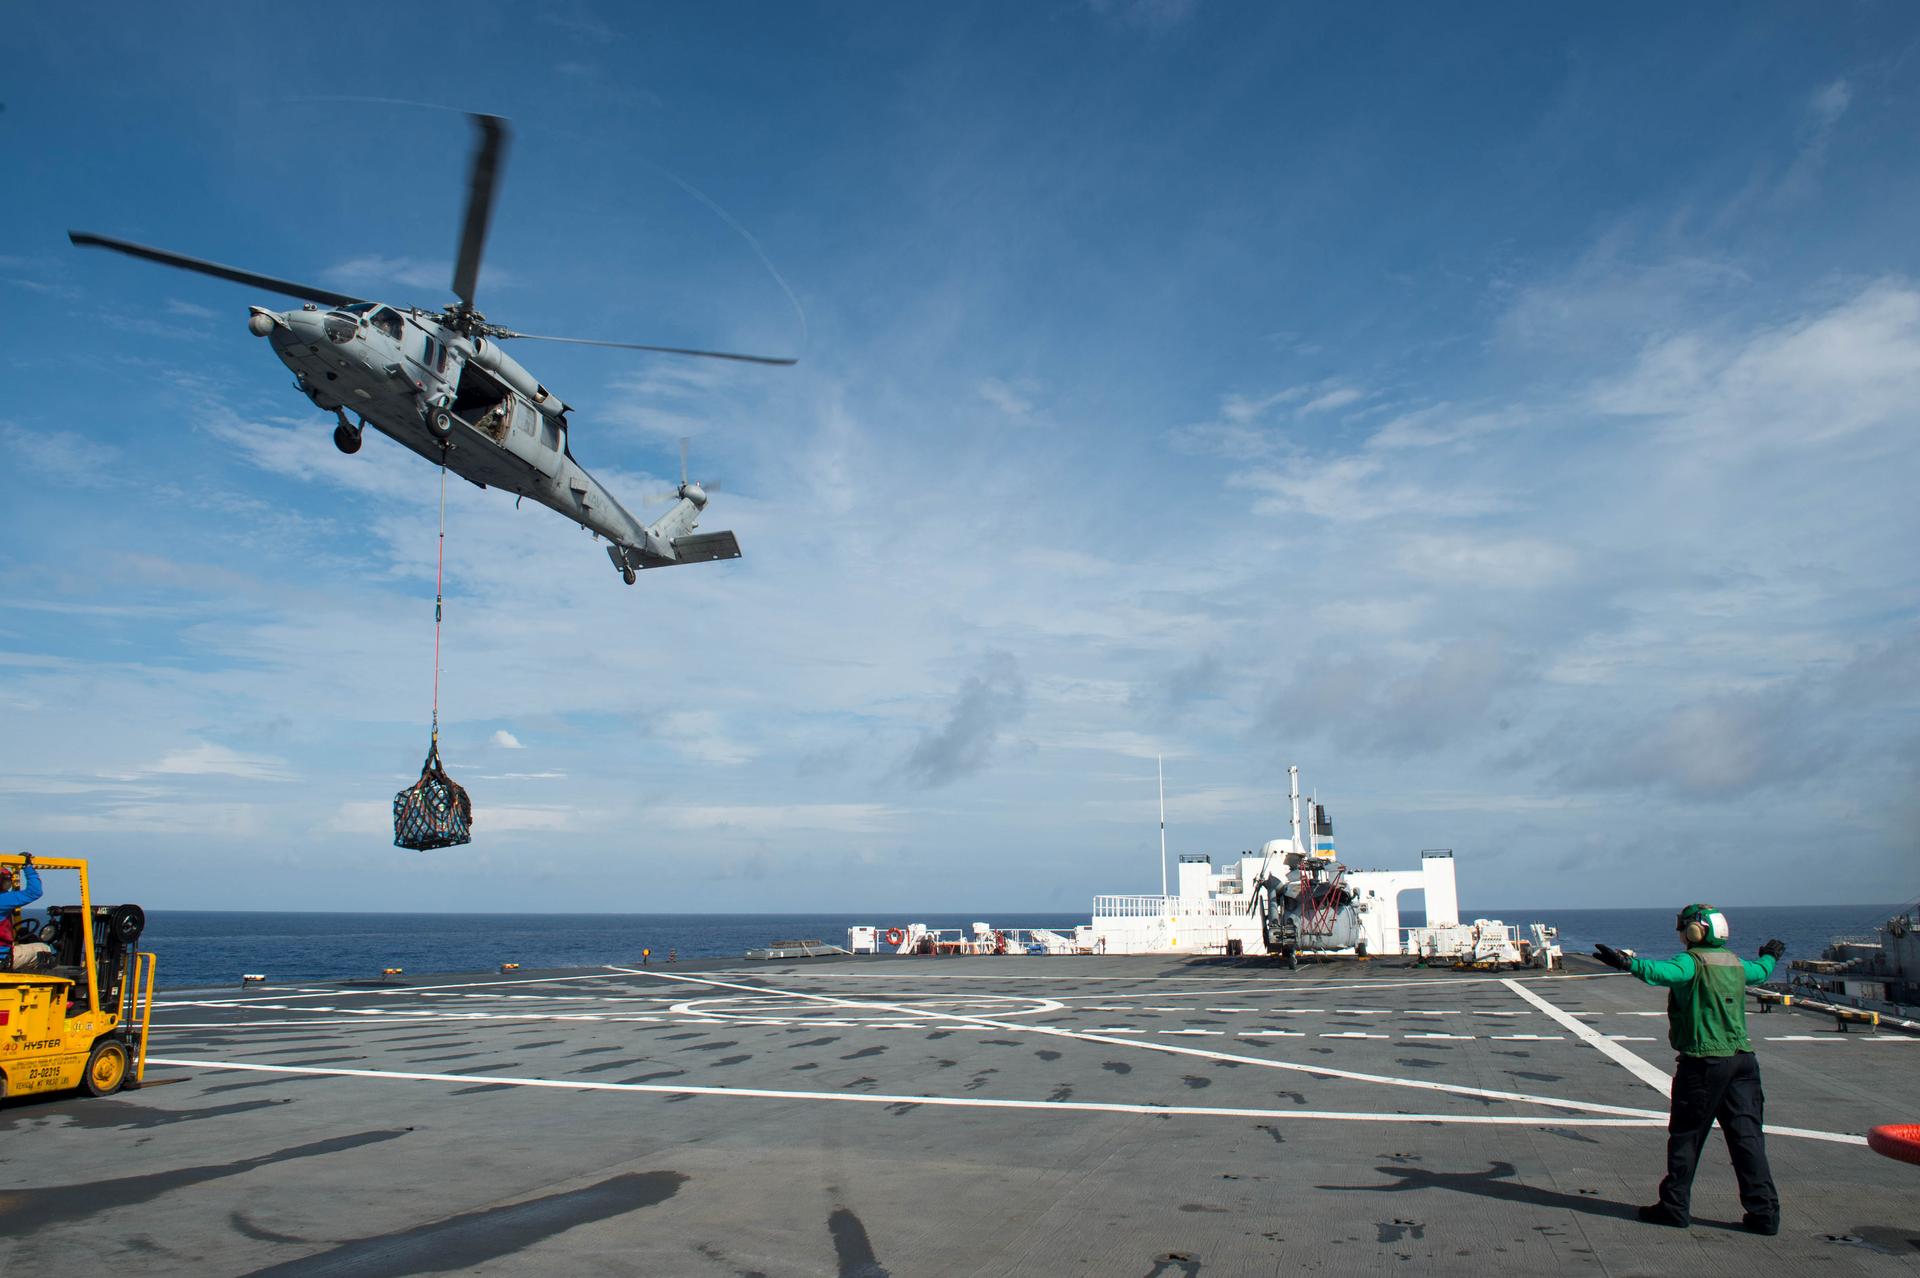 An MH-60S Sea Hawk helicopter delivers cargo to the hospital ship USNS Comfort as the ship is underway in support of humanitarian relief operations to help those affected by Hurricane Maria in Puerto Rico on October 1, 2017.